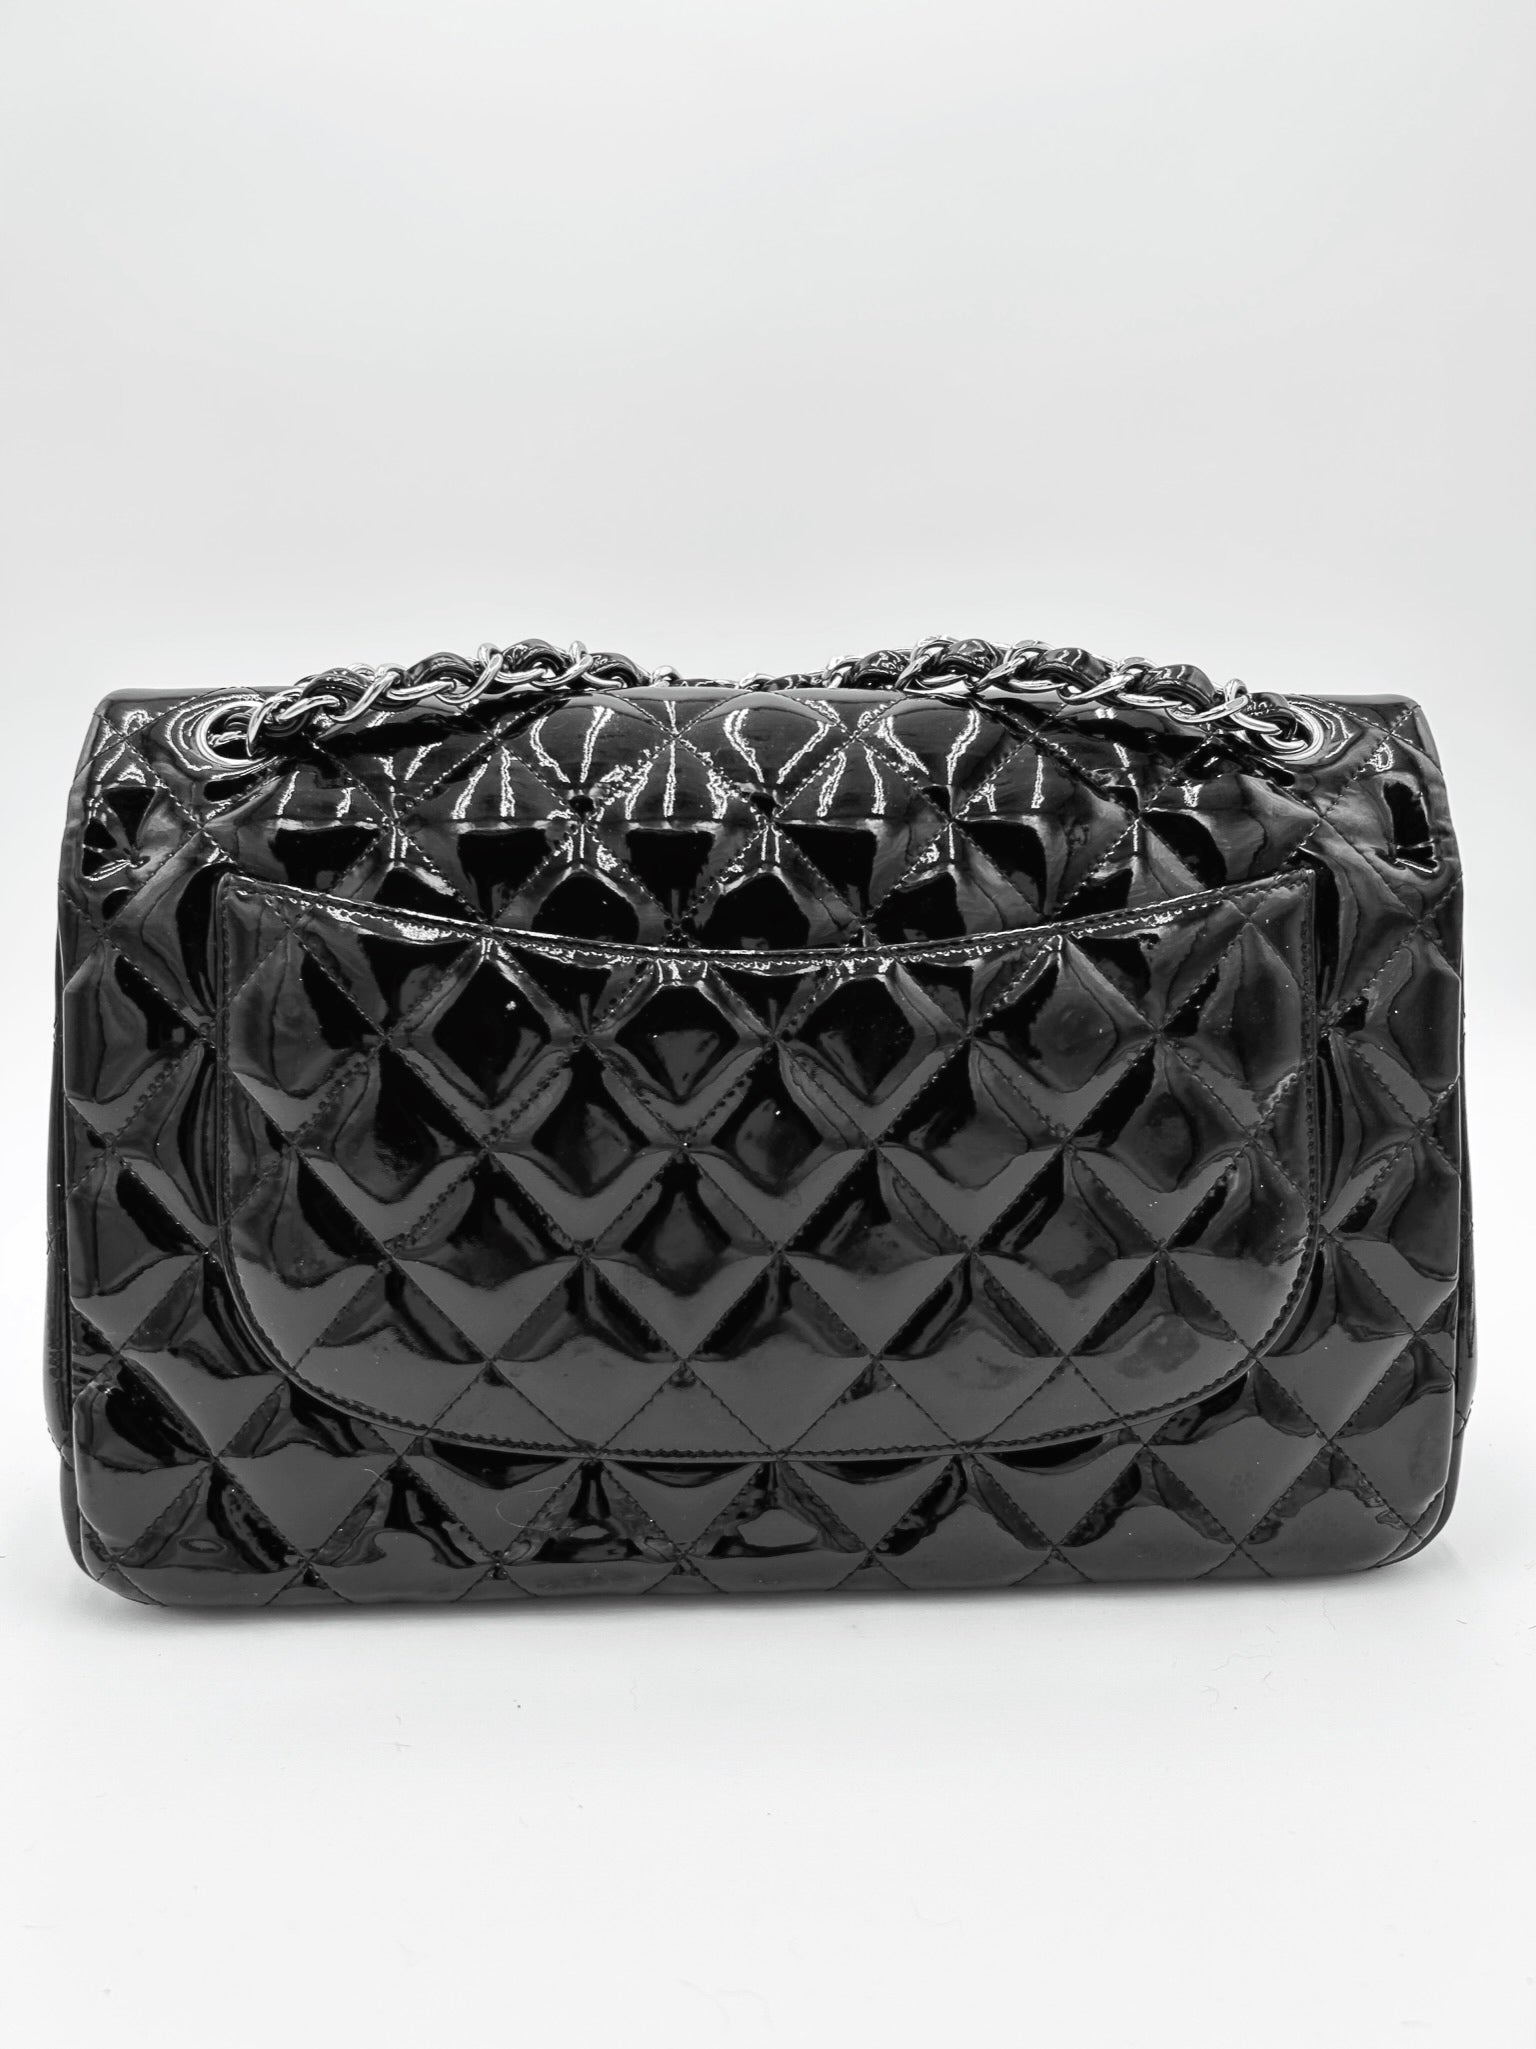 CHANEL BLACK QUILTED PATENT LEATHER MEDIUM CLASSIC DOUBLE FLAP BAG